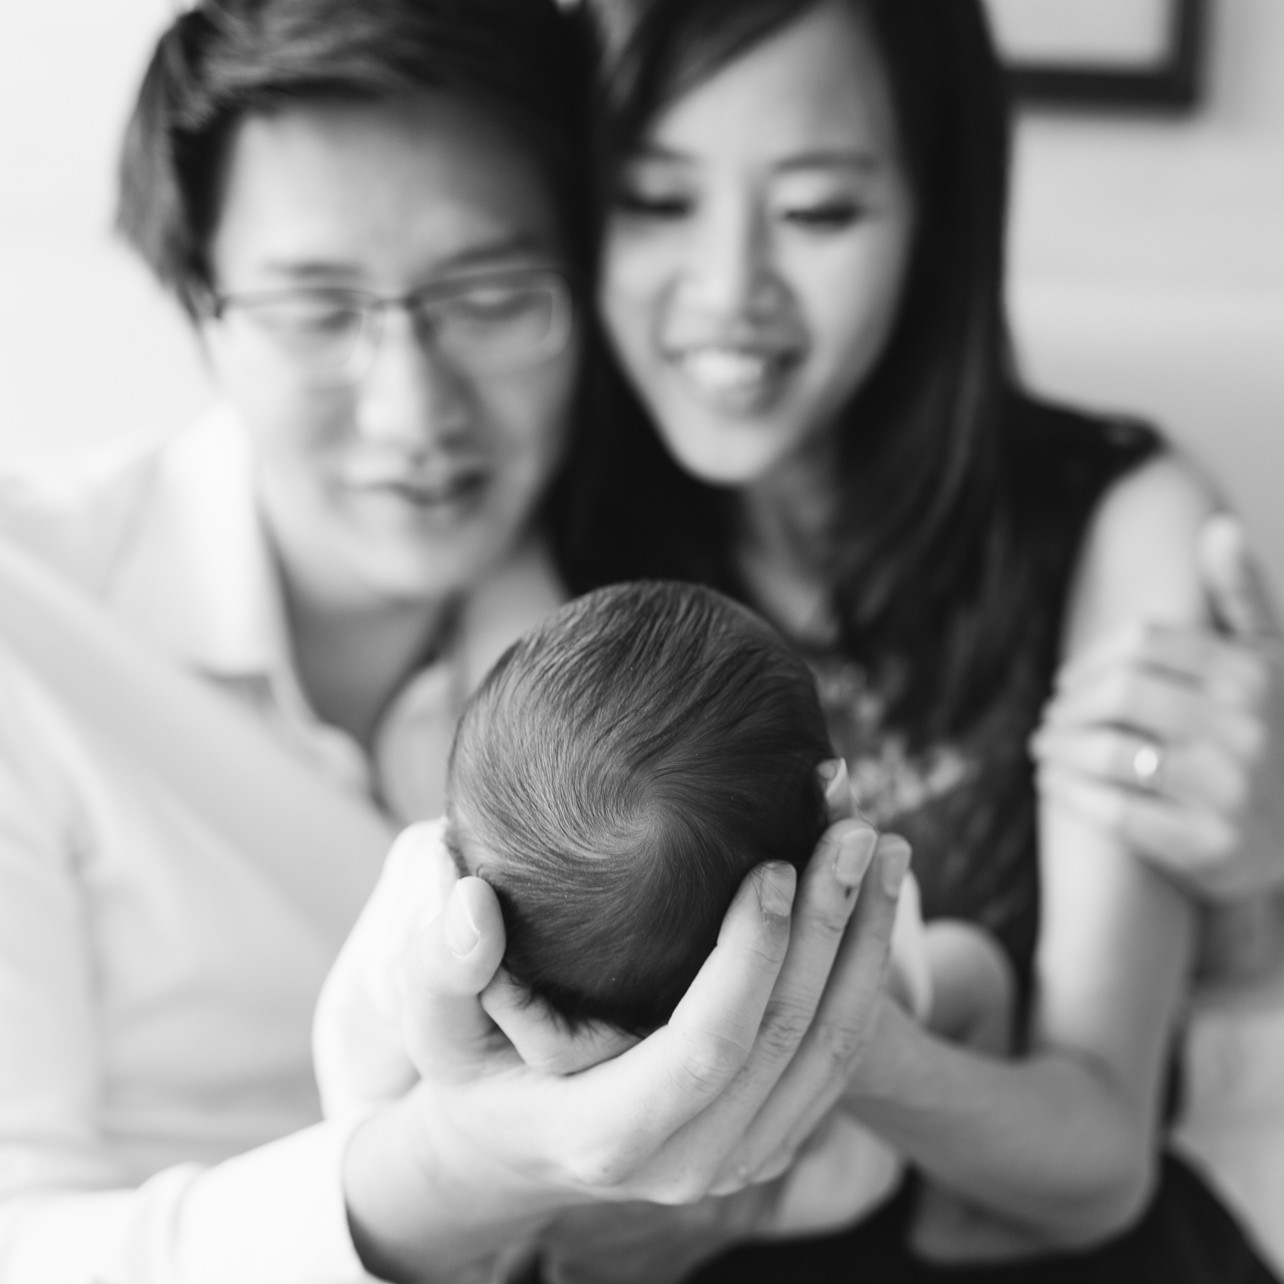 Newborn Session in Happy Valley with William - BW focus on baby's head and parents smiling in the background